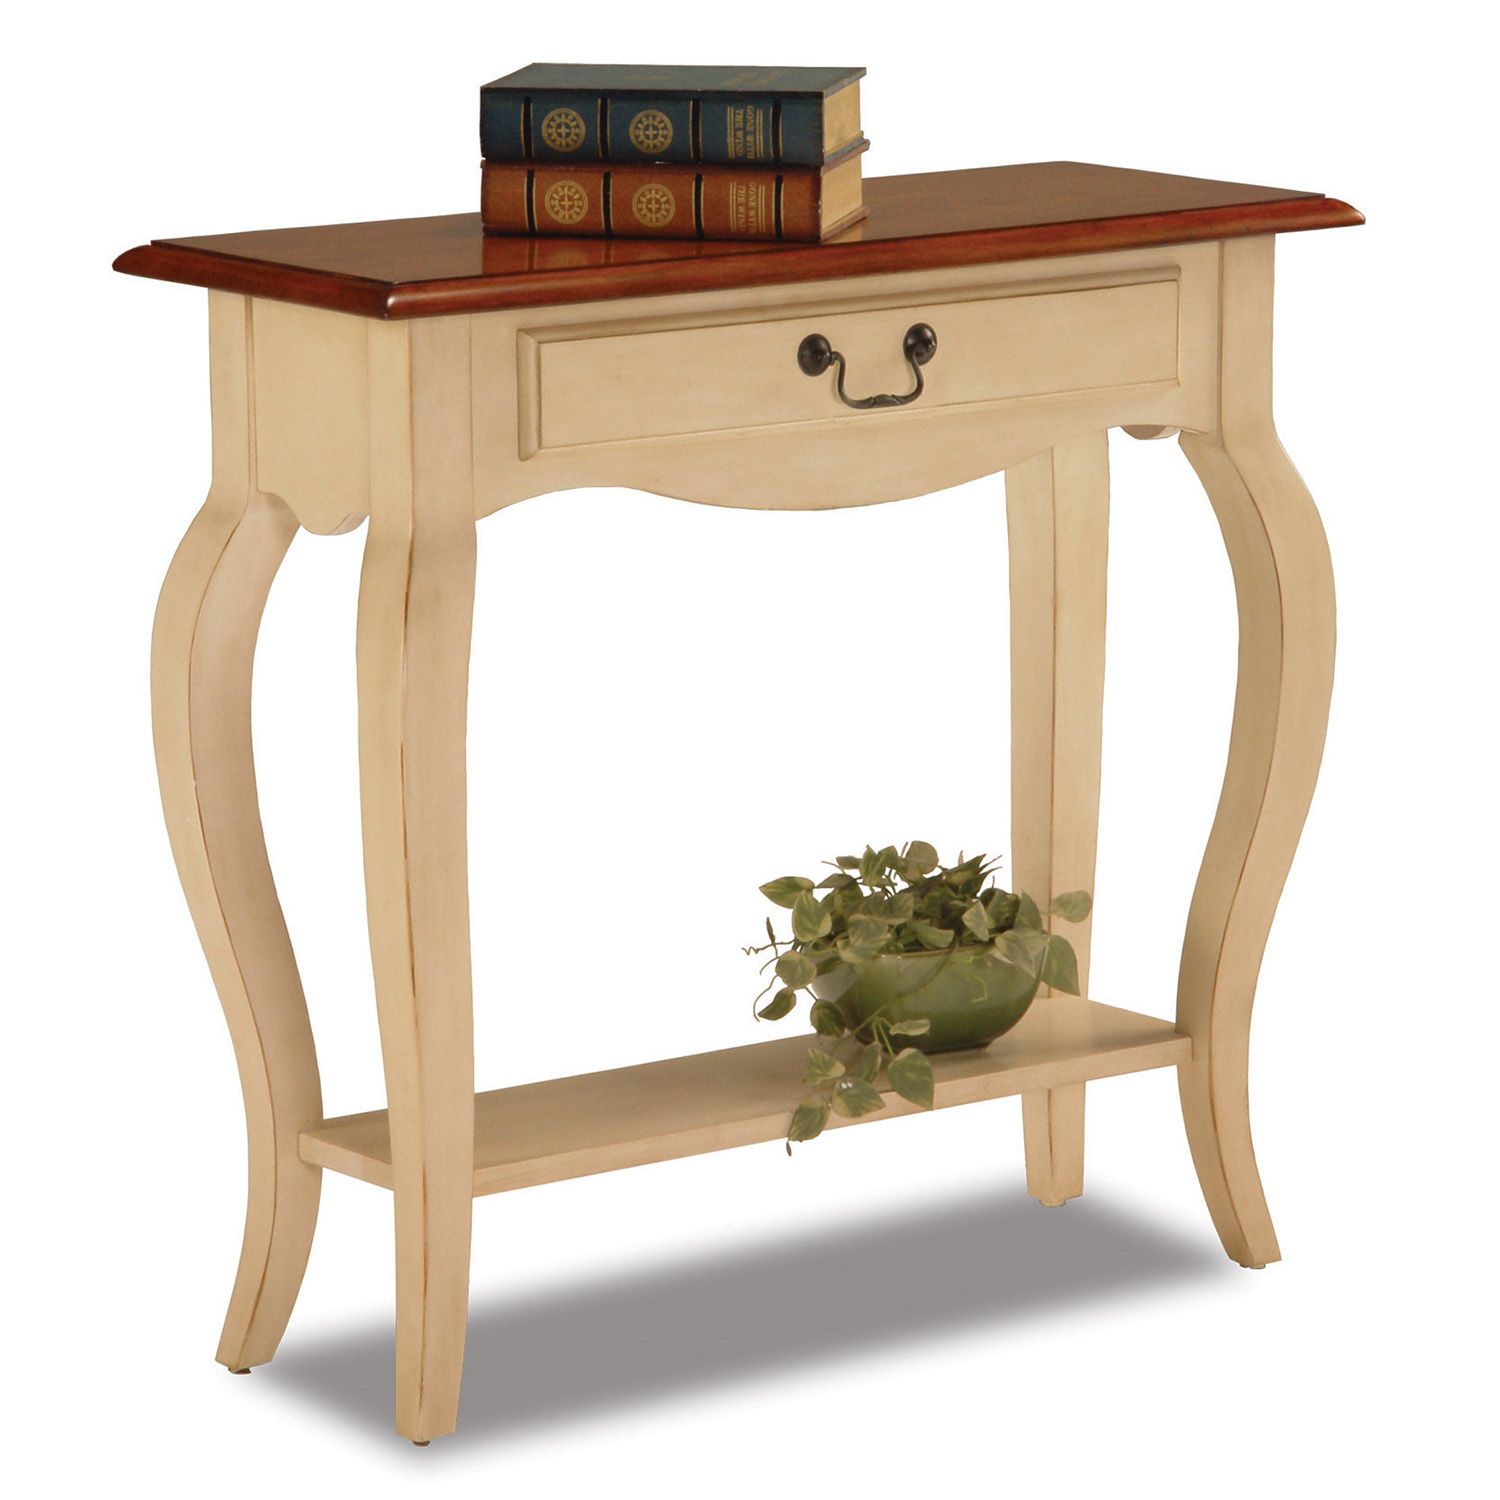 Image for Leick Furniture Classic Sofa Table at Kohl's.